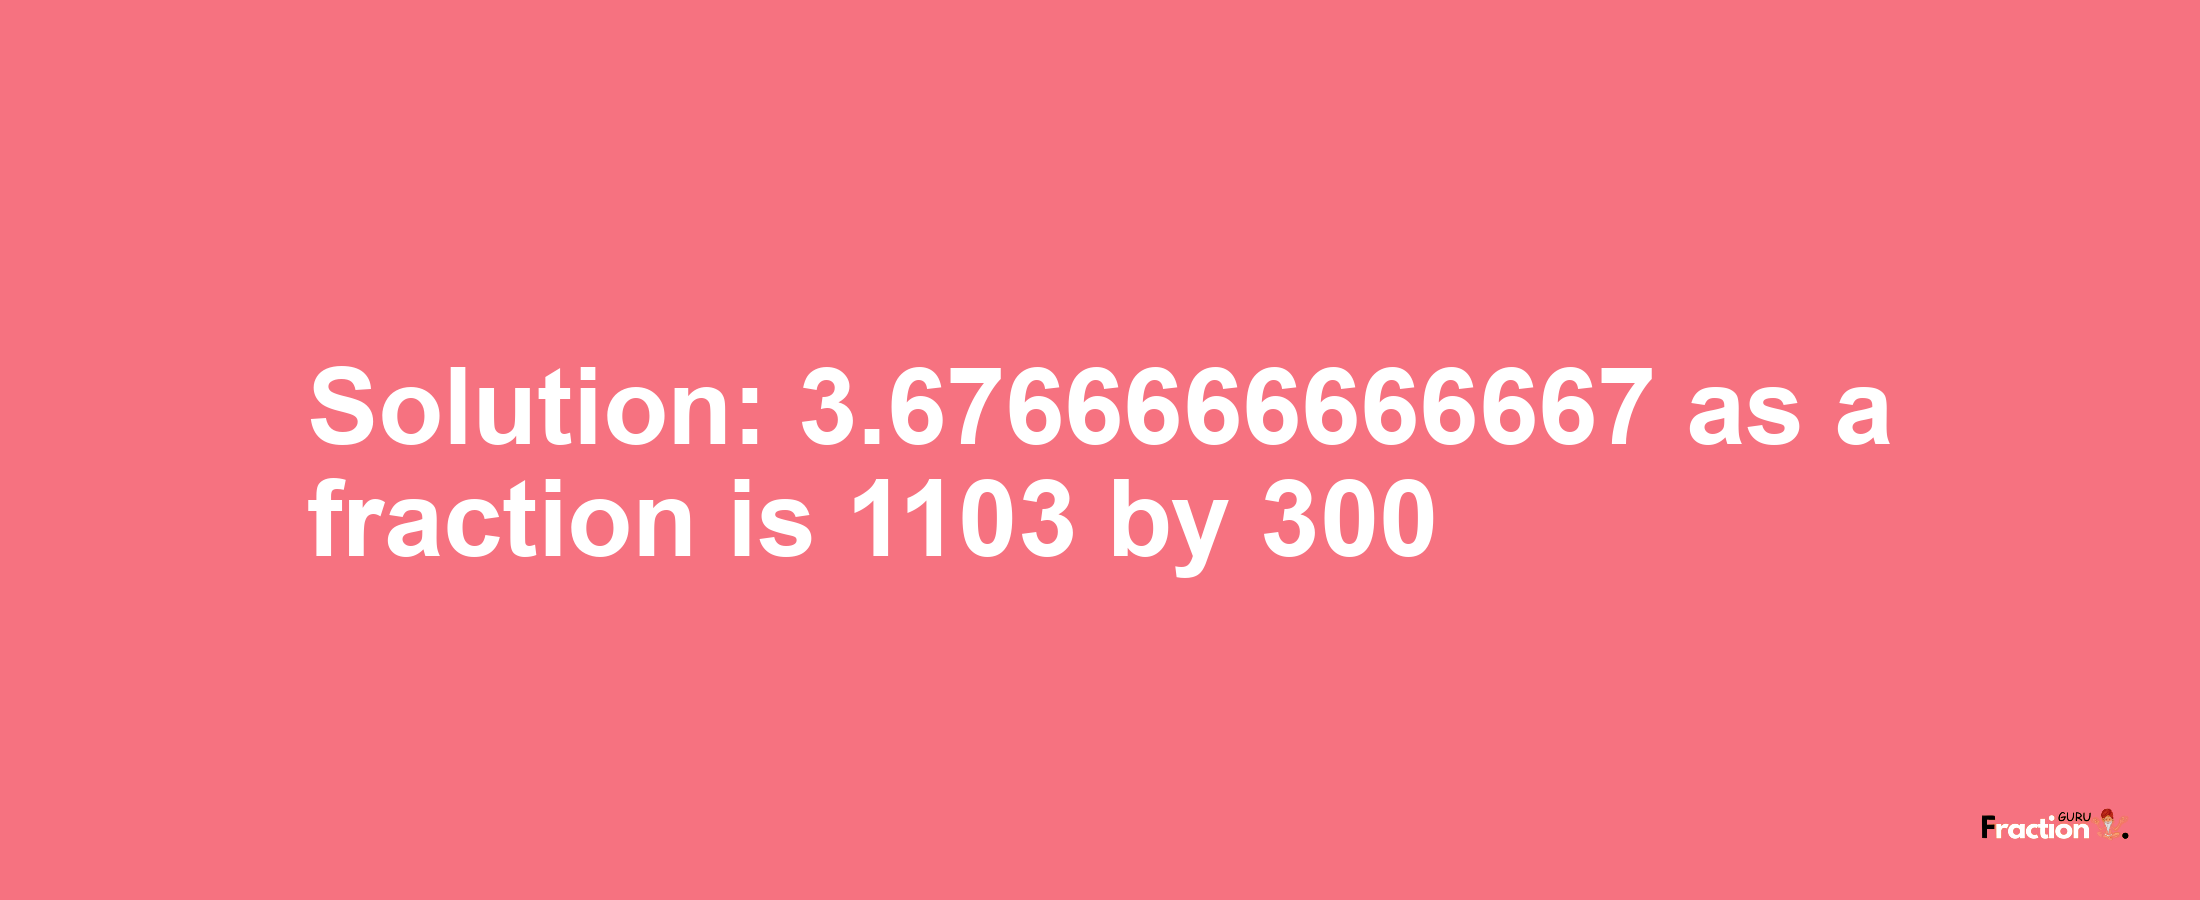 Solution:3.6766666666667 as a fraction is 1103/300